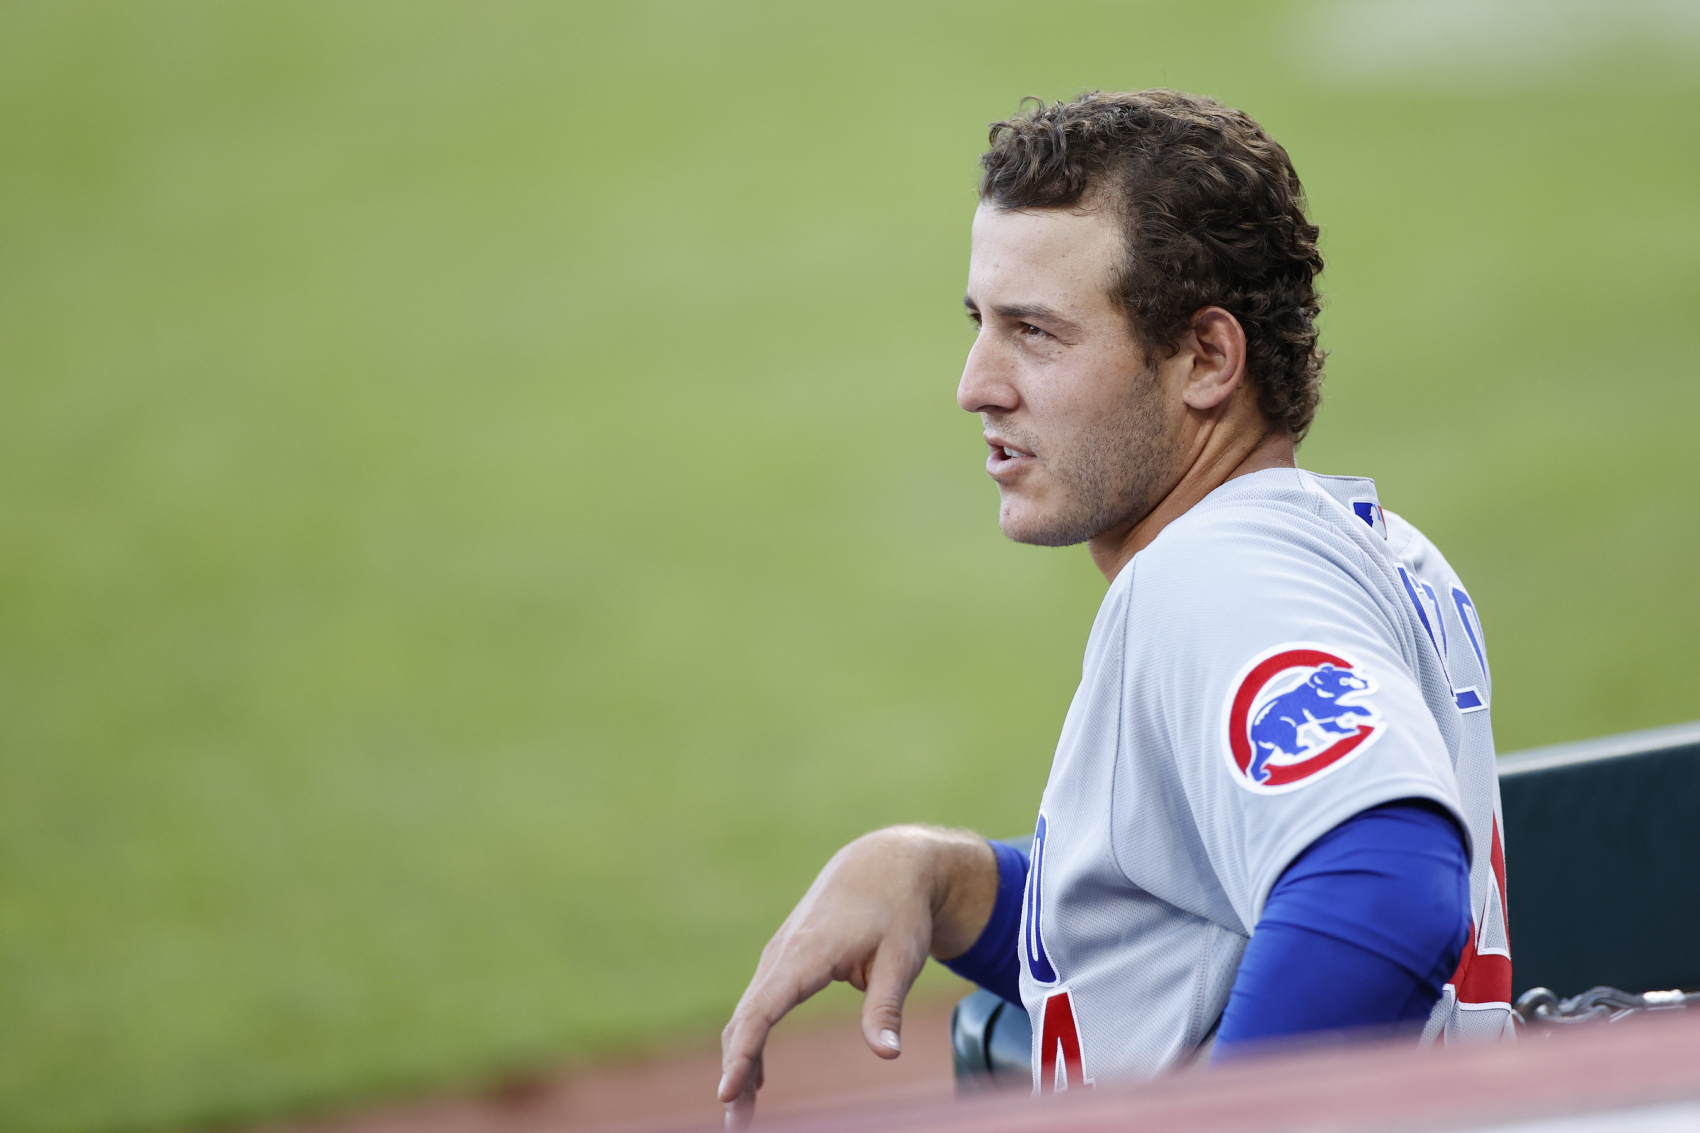 Teams across multiple sports boycotted games on Wednesday. Cubs star Anthony Rizzo played but had a strong message after the game.